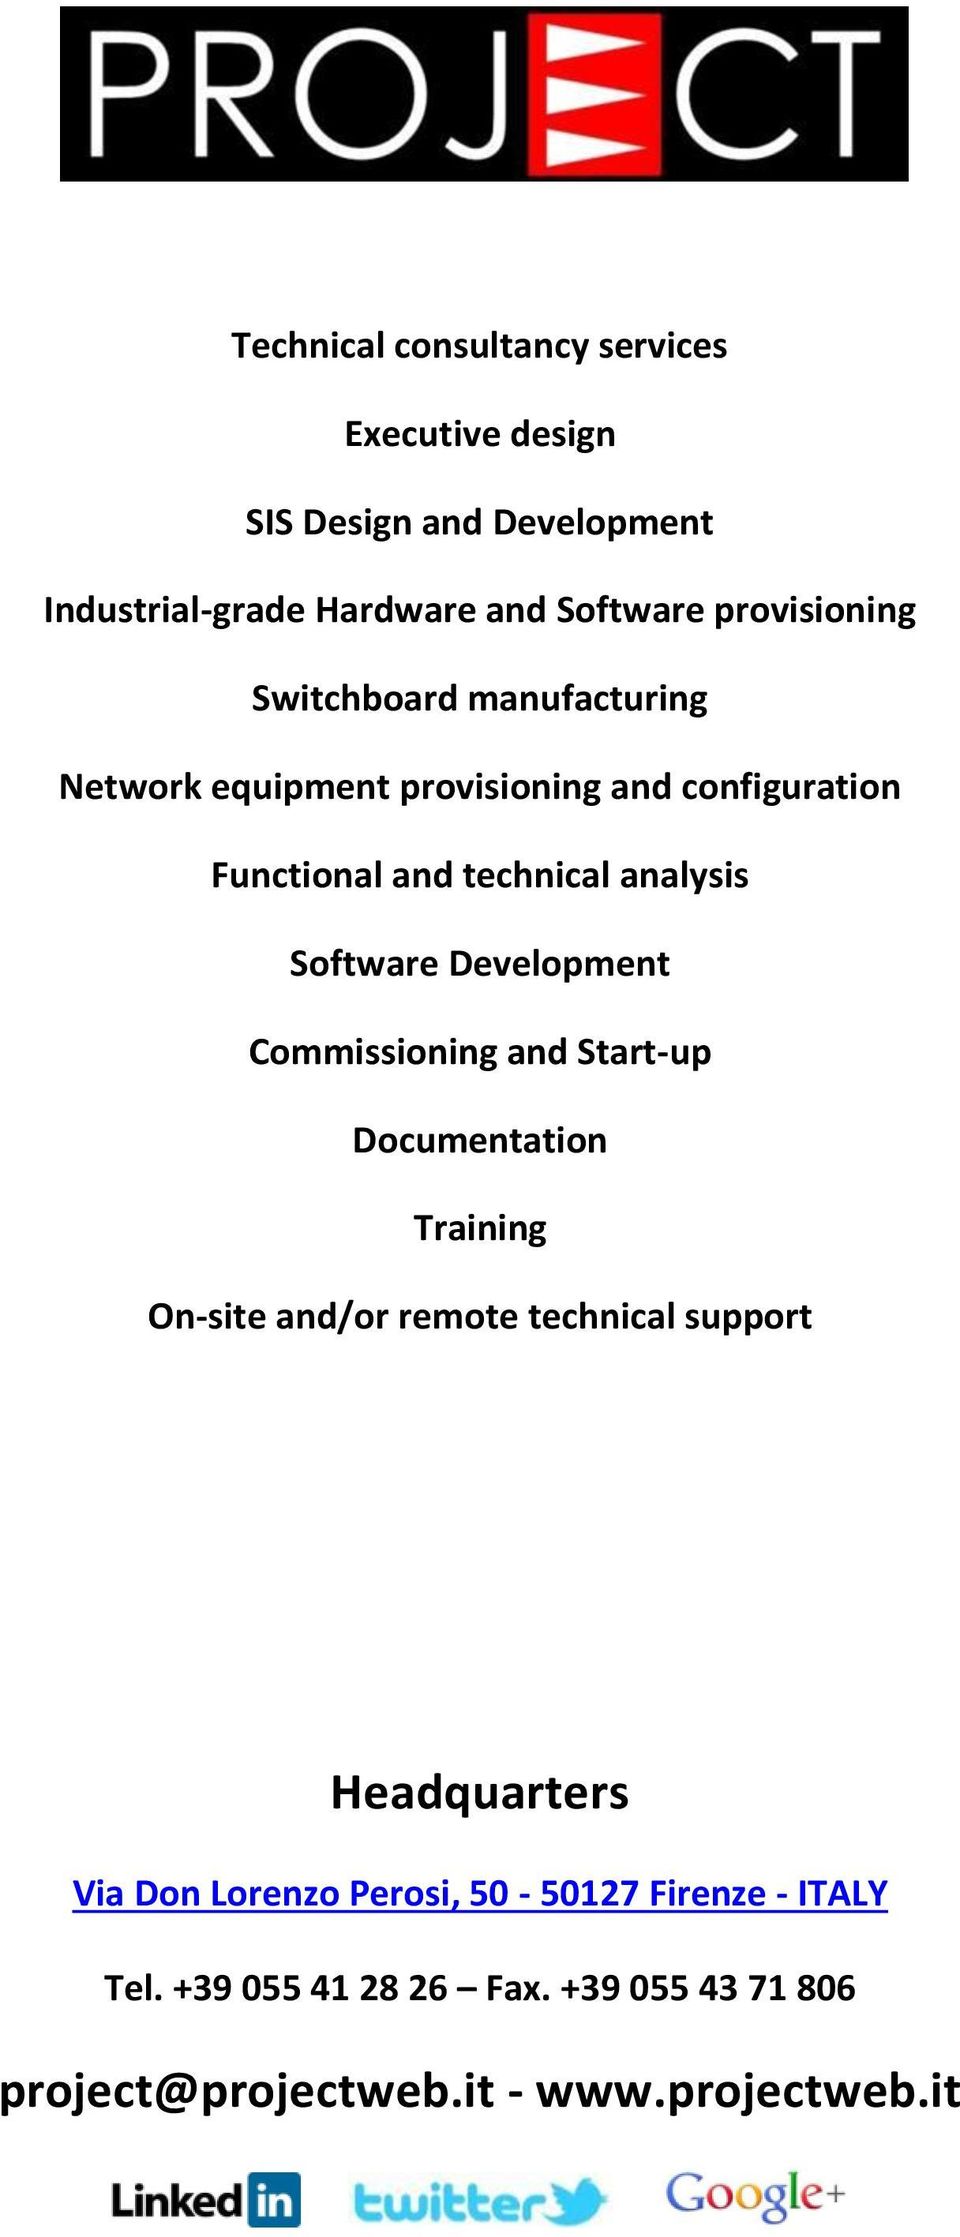 Software Development Commissioning and Start-up Documentation Training On-site and/or remote technical support Headquarters